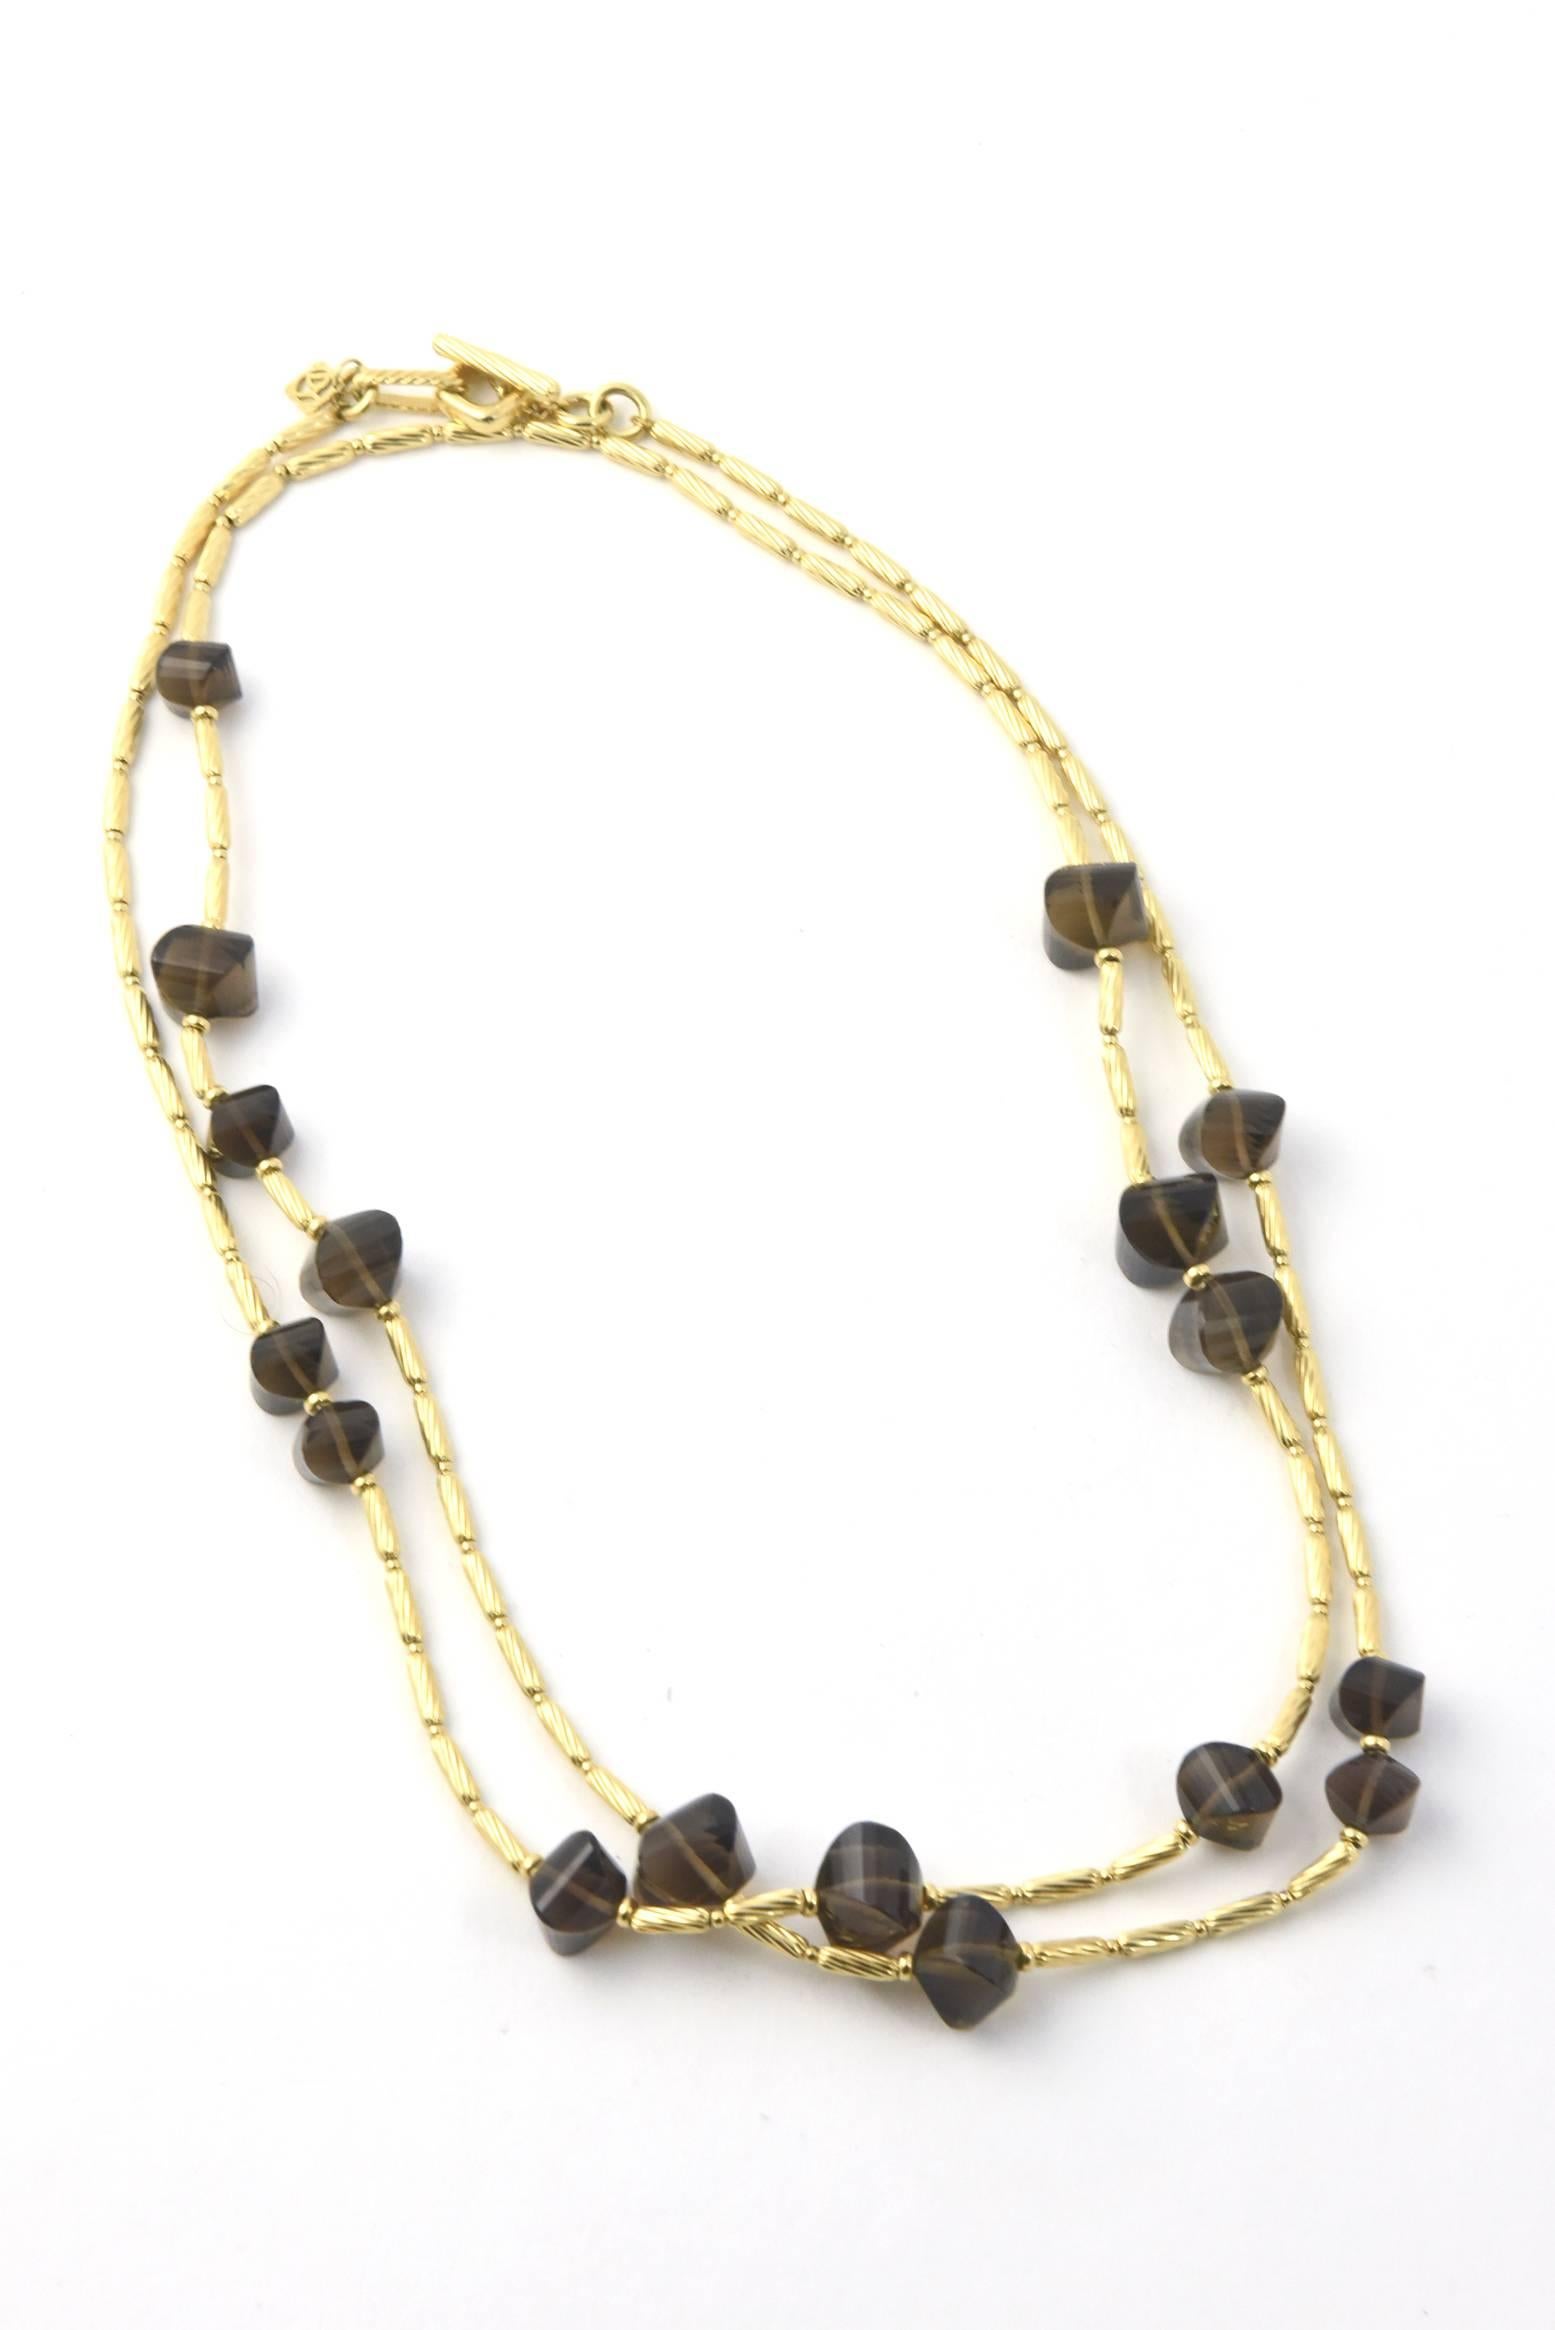 David Yurman 18k Yellow Gold twisted cable sculpted beads  & smoky quartz bead necklace. Toggle clasp. Necklace, 44''L. Beads, 16mm - 10mm in diameter. 

Marked: D.Y 750